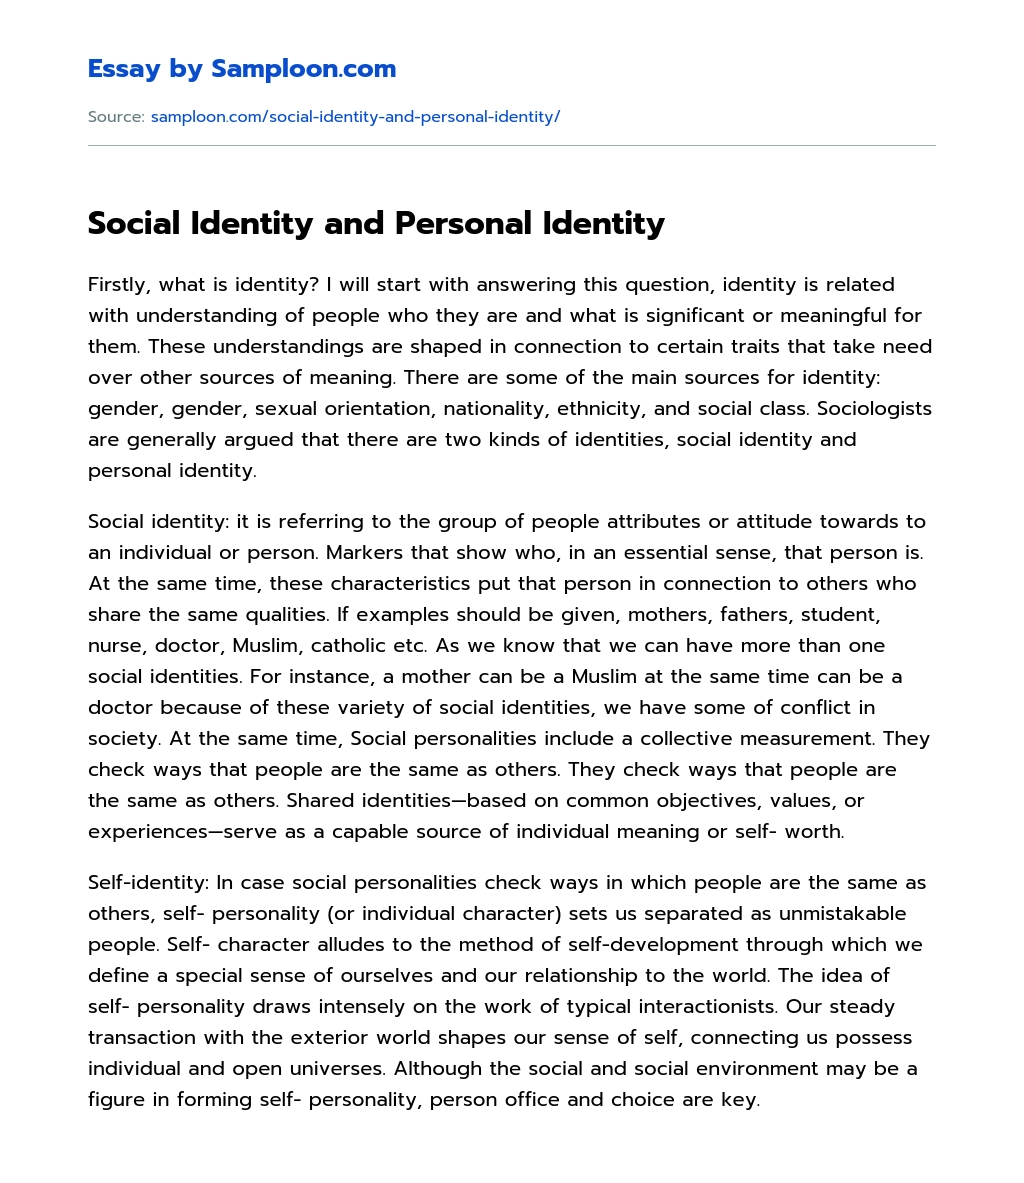 Social Identity and Personal Identity essay